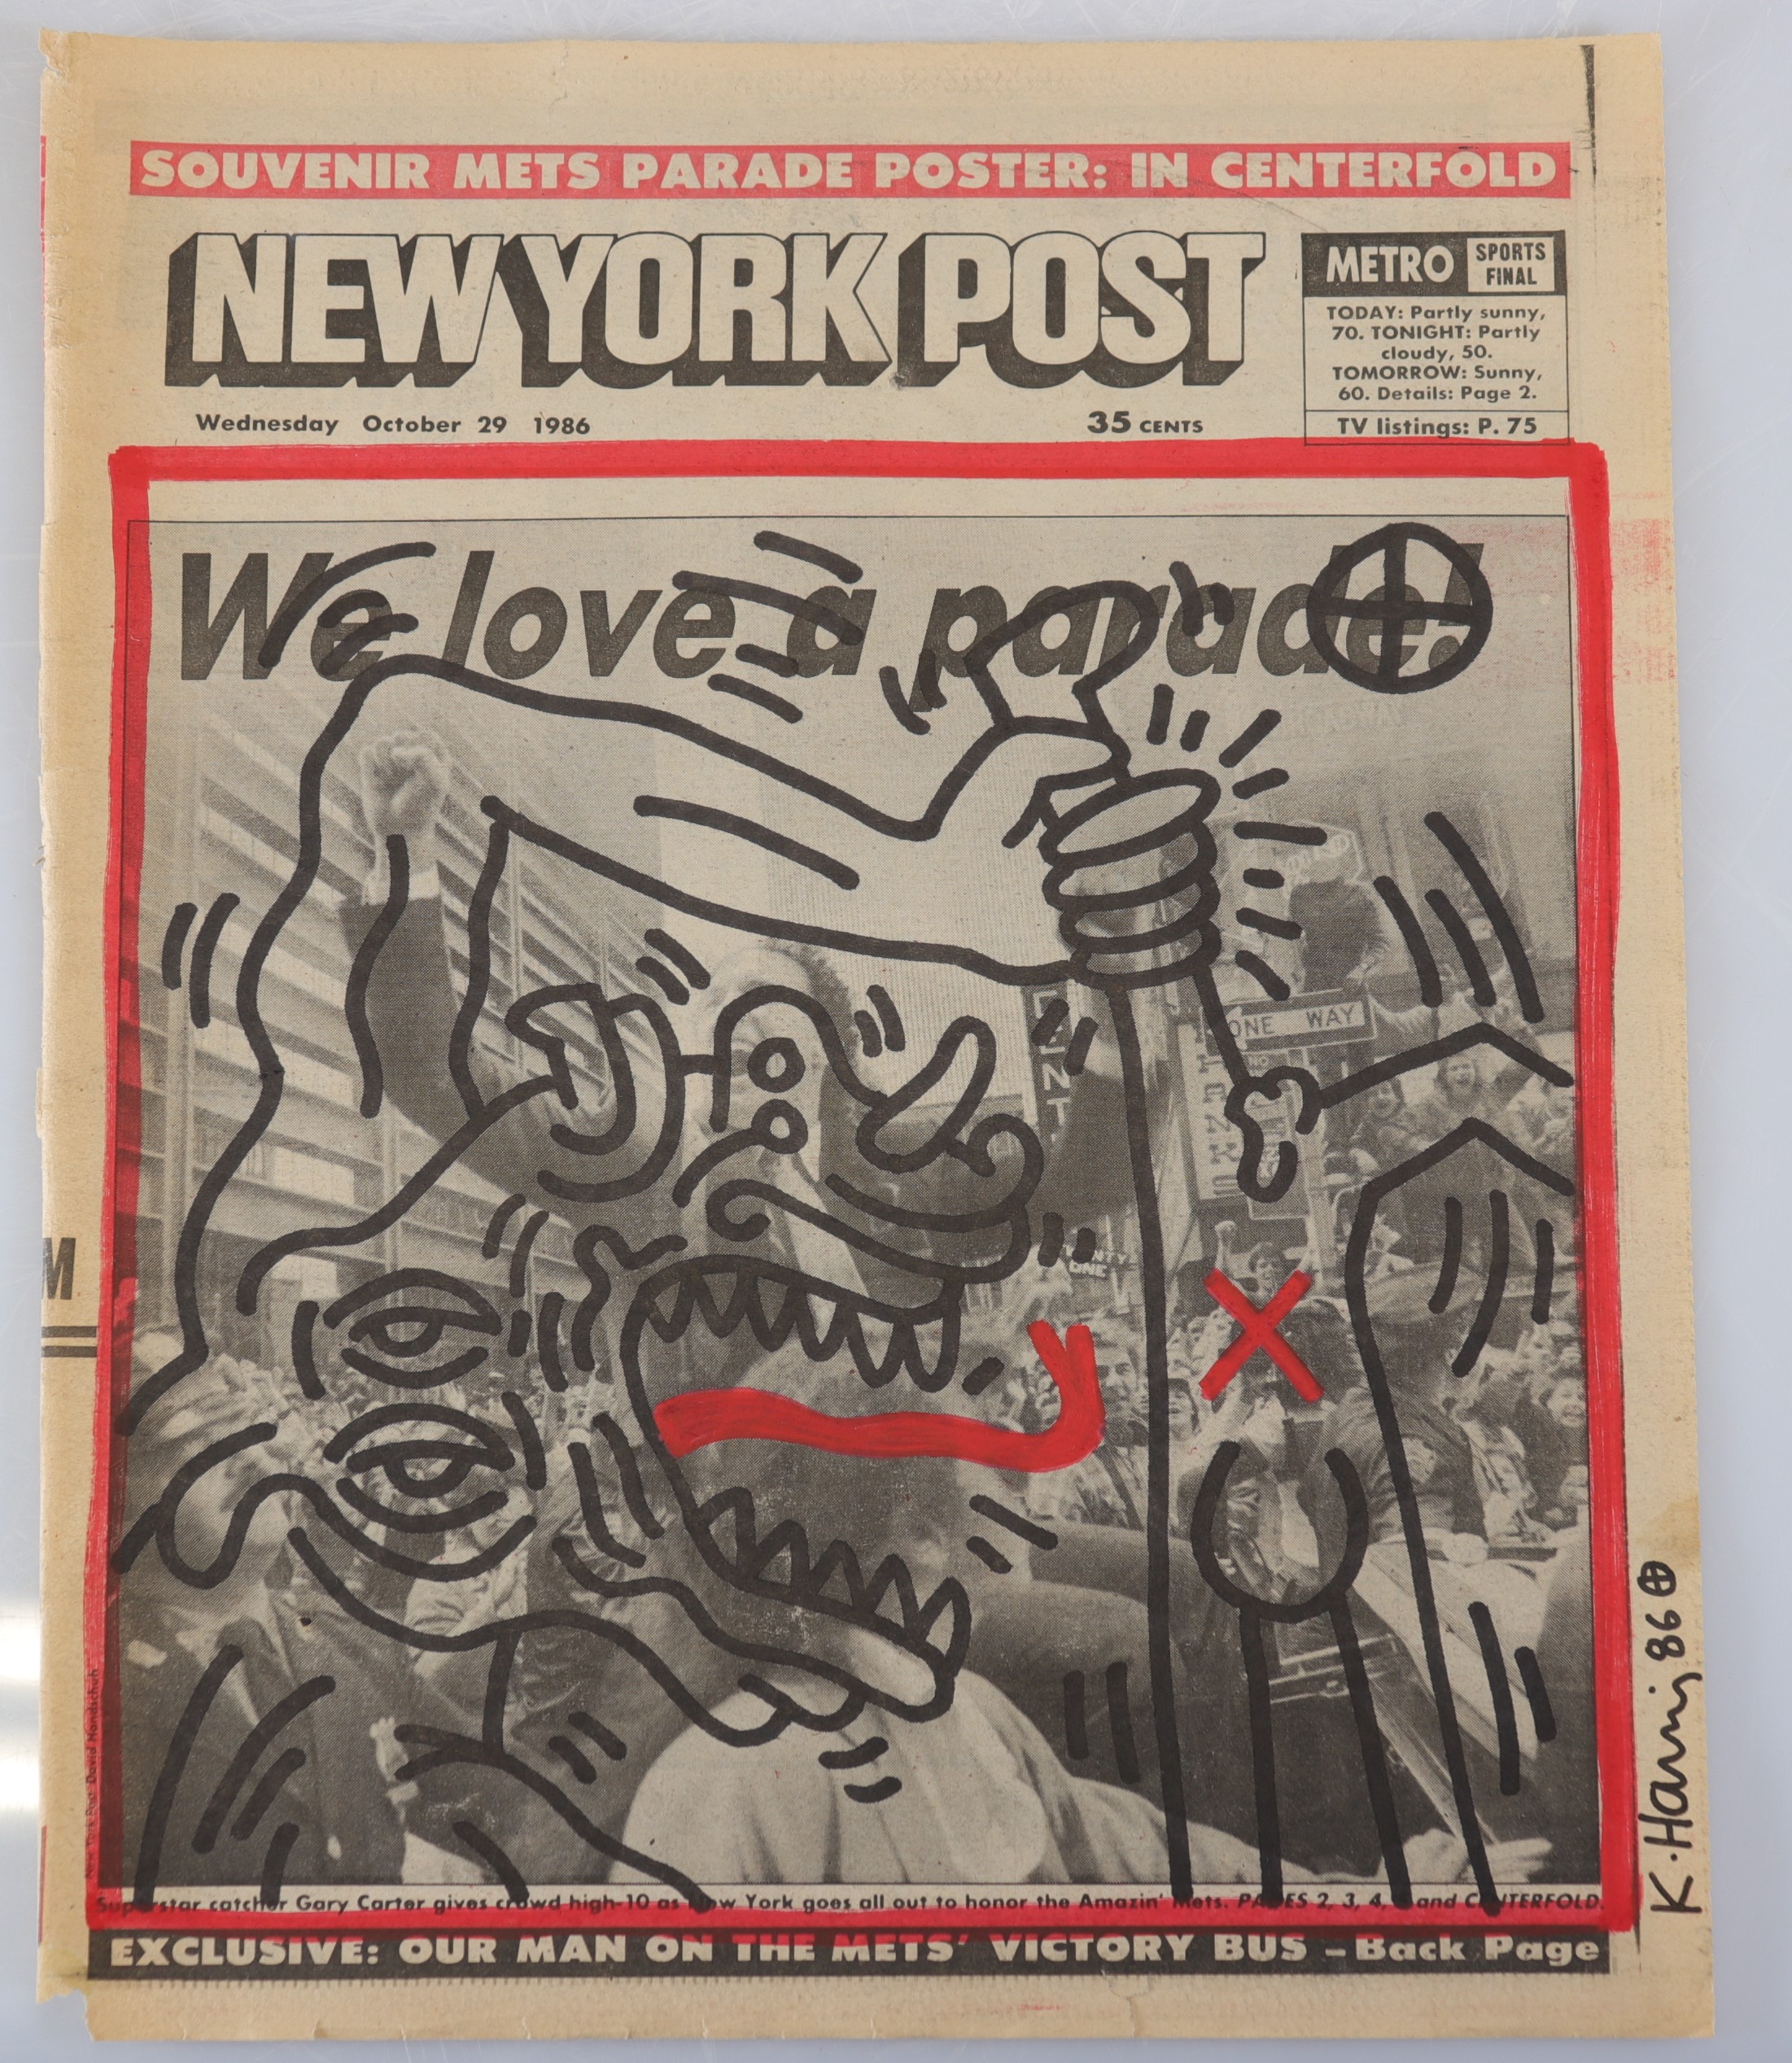 Keith Haring. Original drawing in black and red marker on a newspaper page from the New York Post of